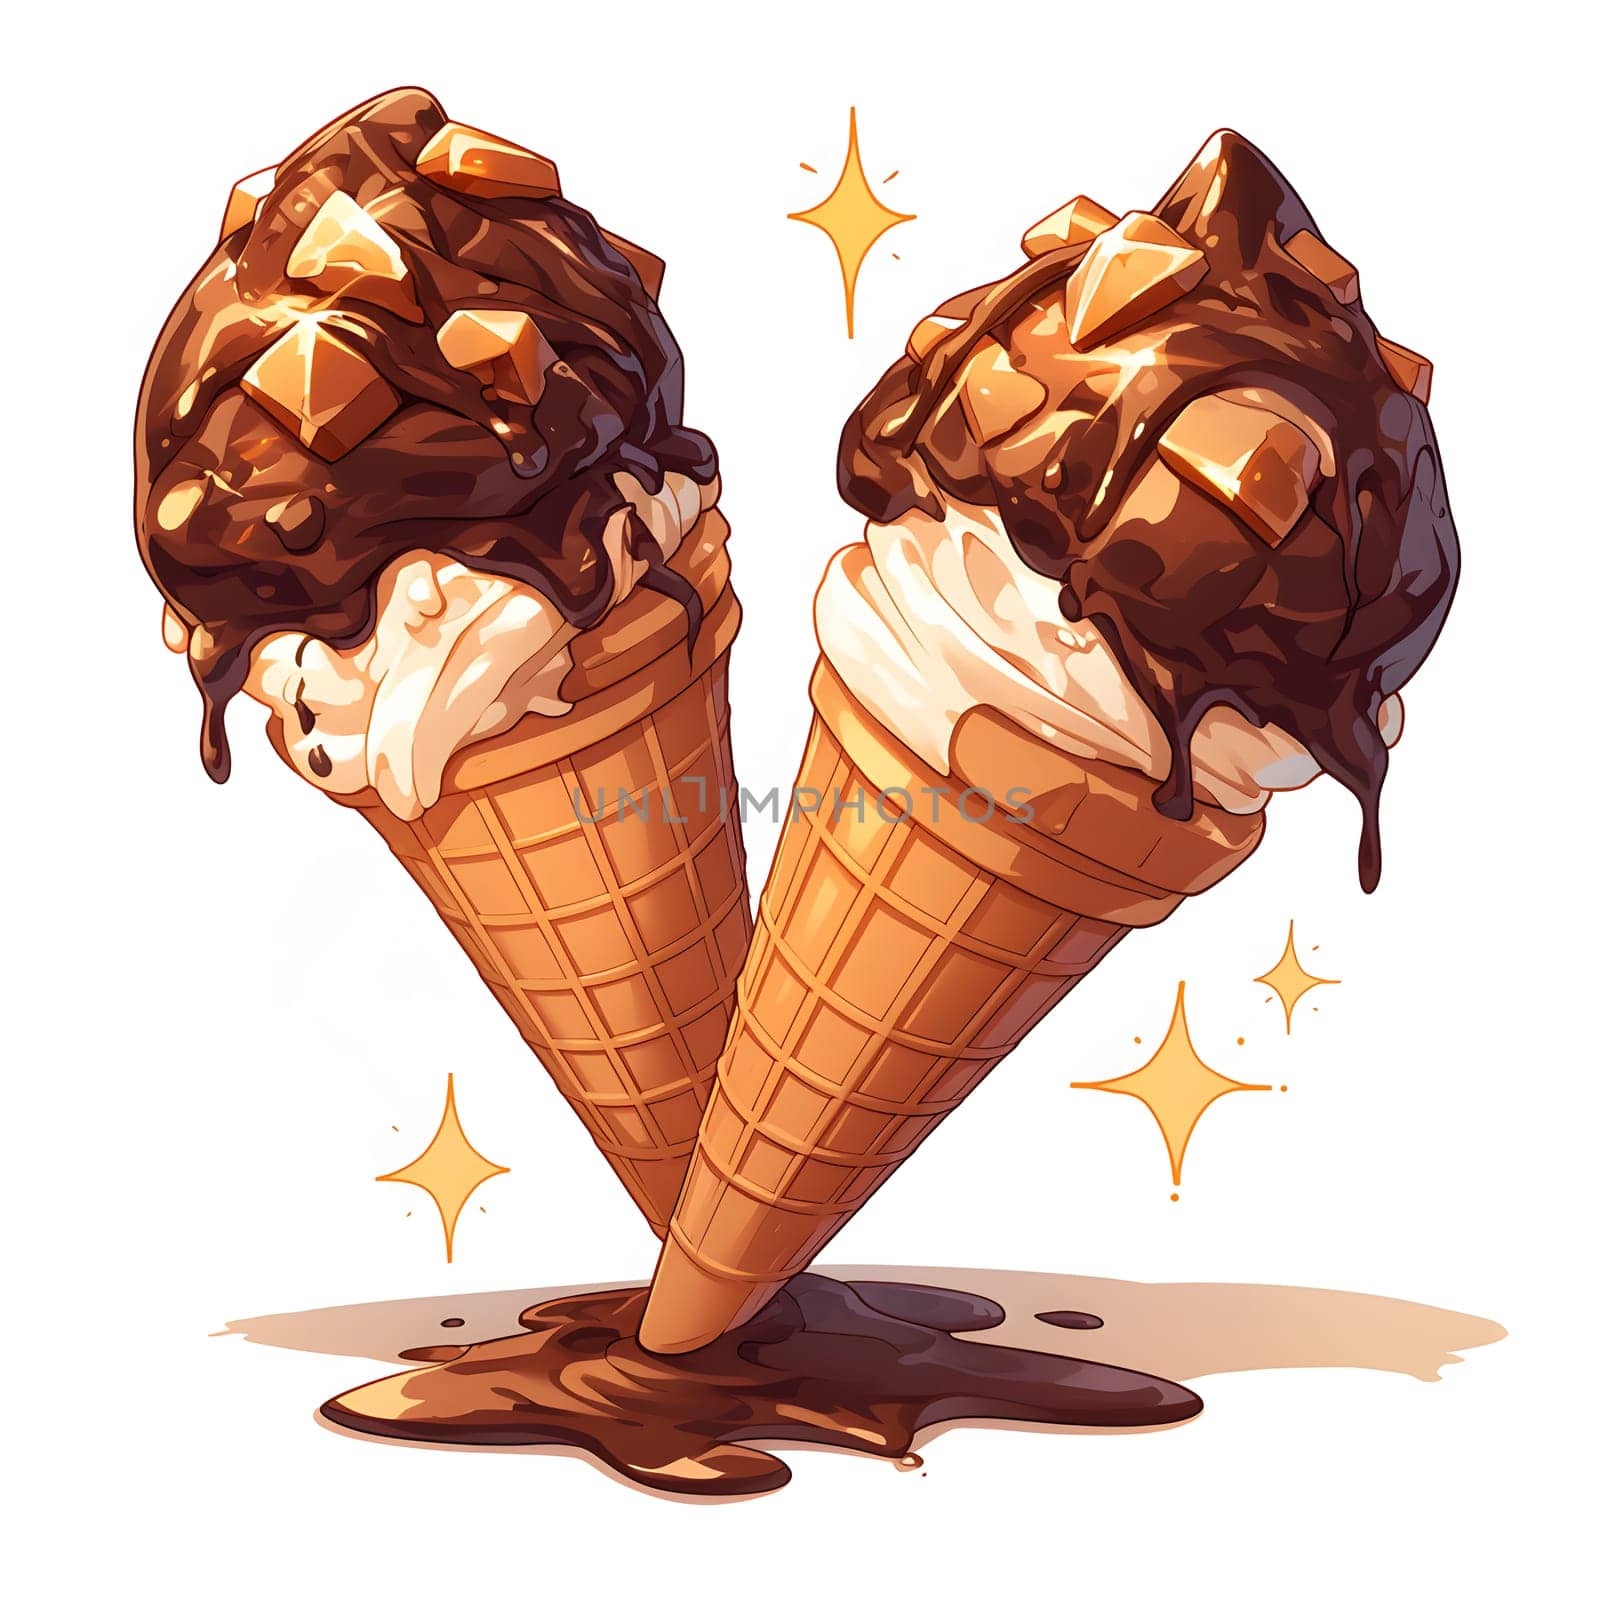 Two ice cream cones with chocolate and caramel toppings stacked together by Nadtochiy